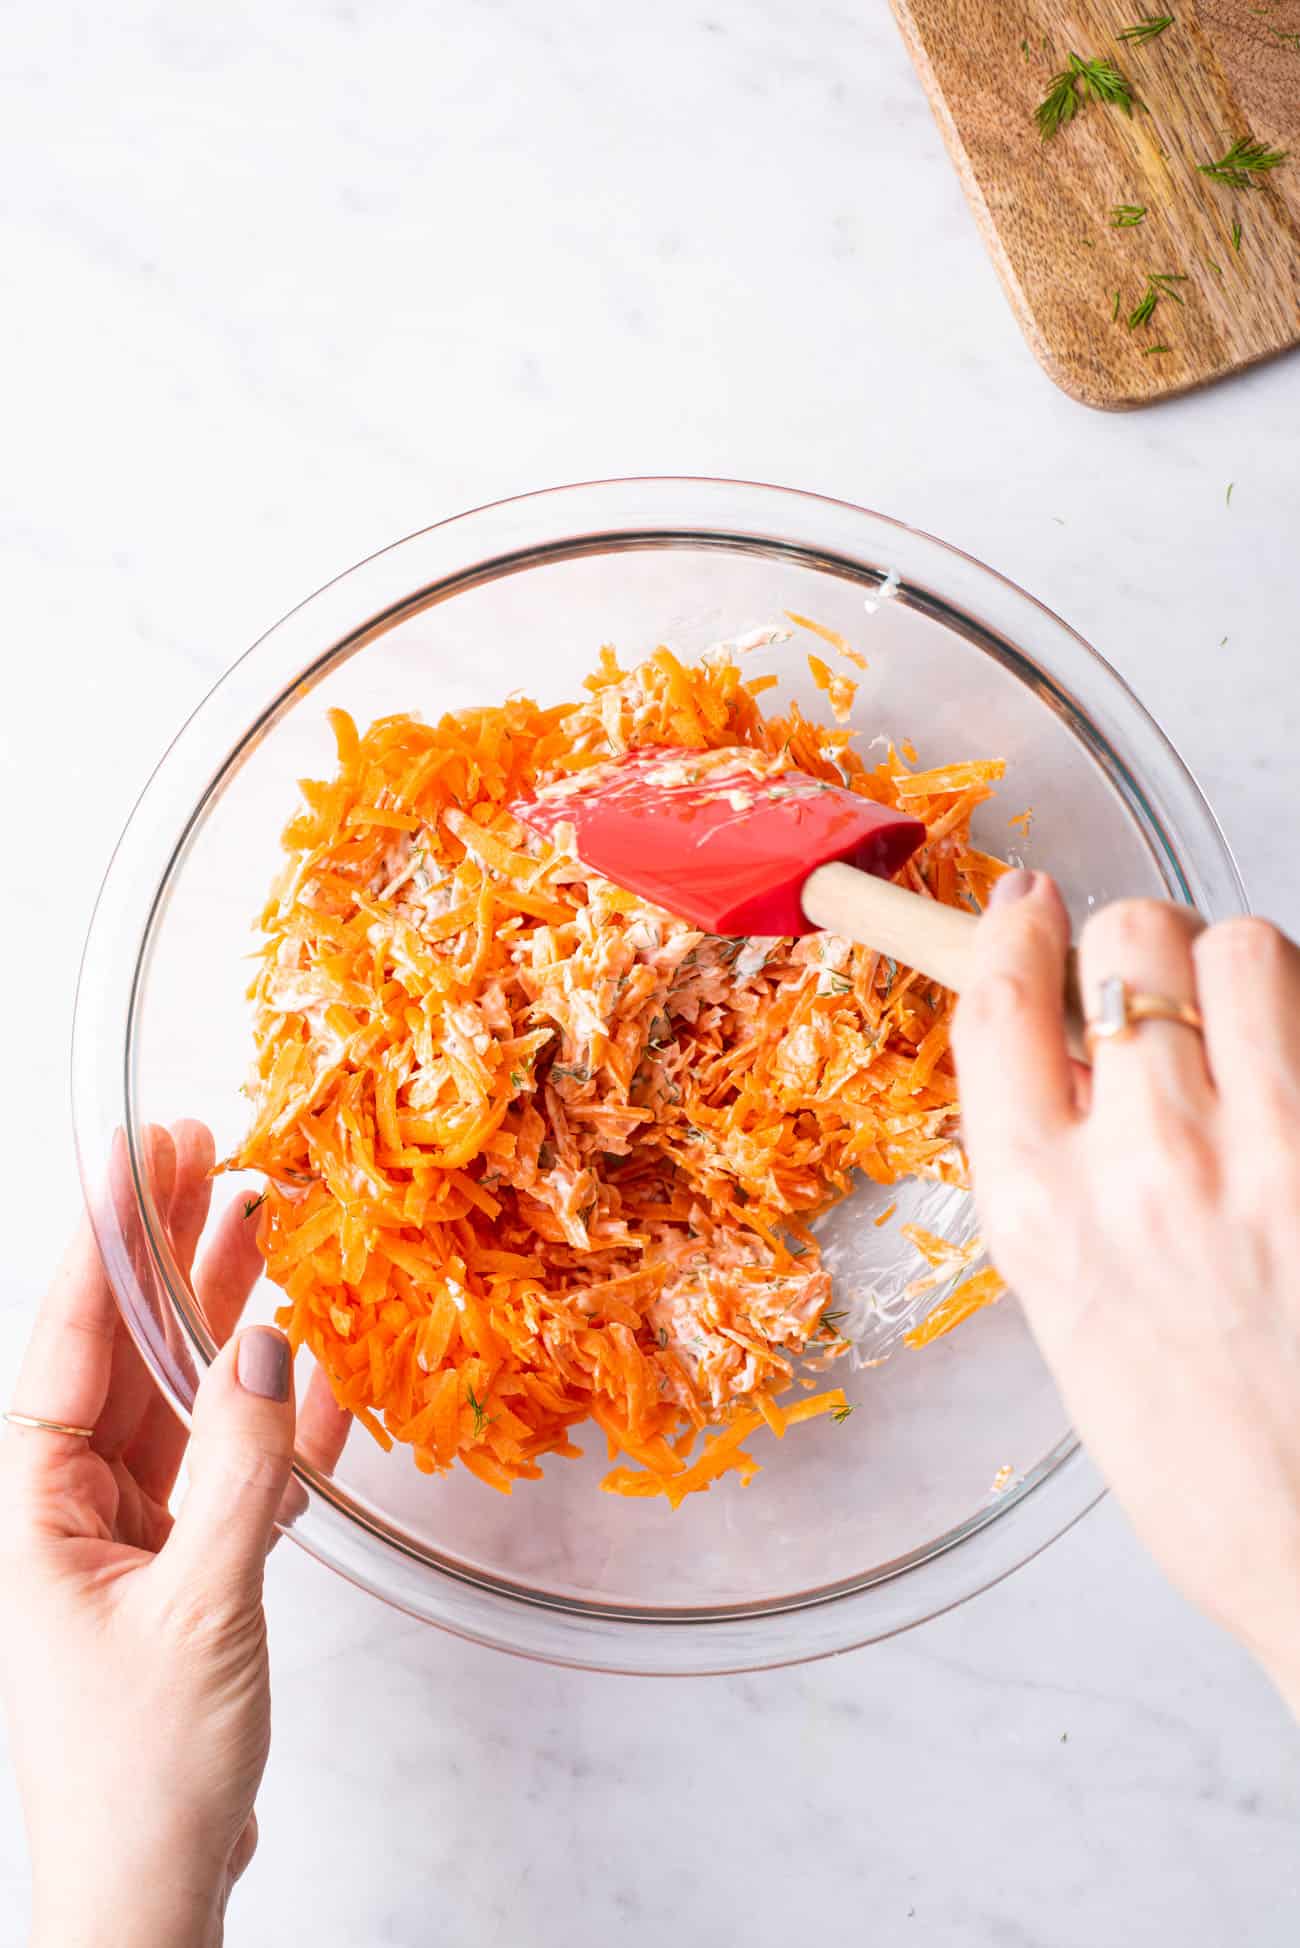 Woman's hands mixing a shredded carrot salad with a yogurt dressing in a glass bowl